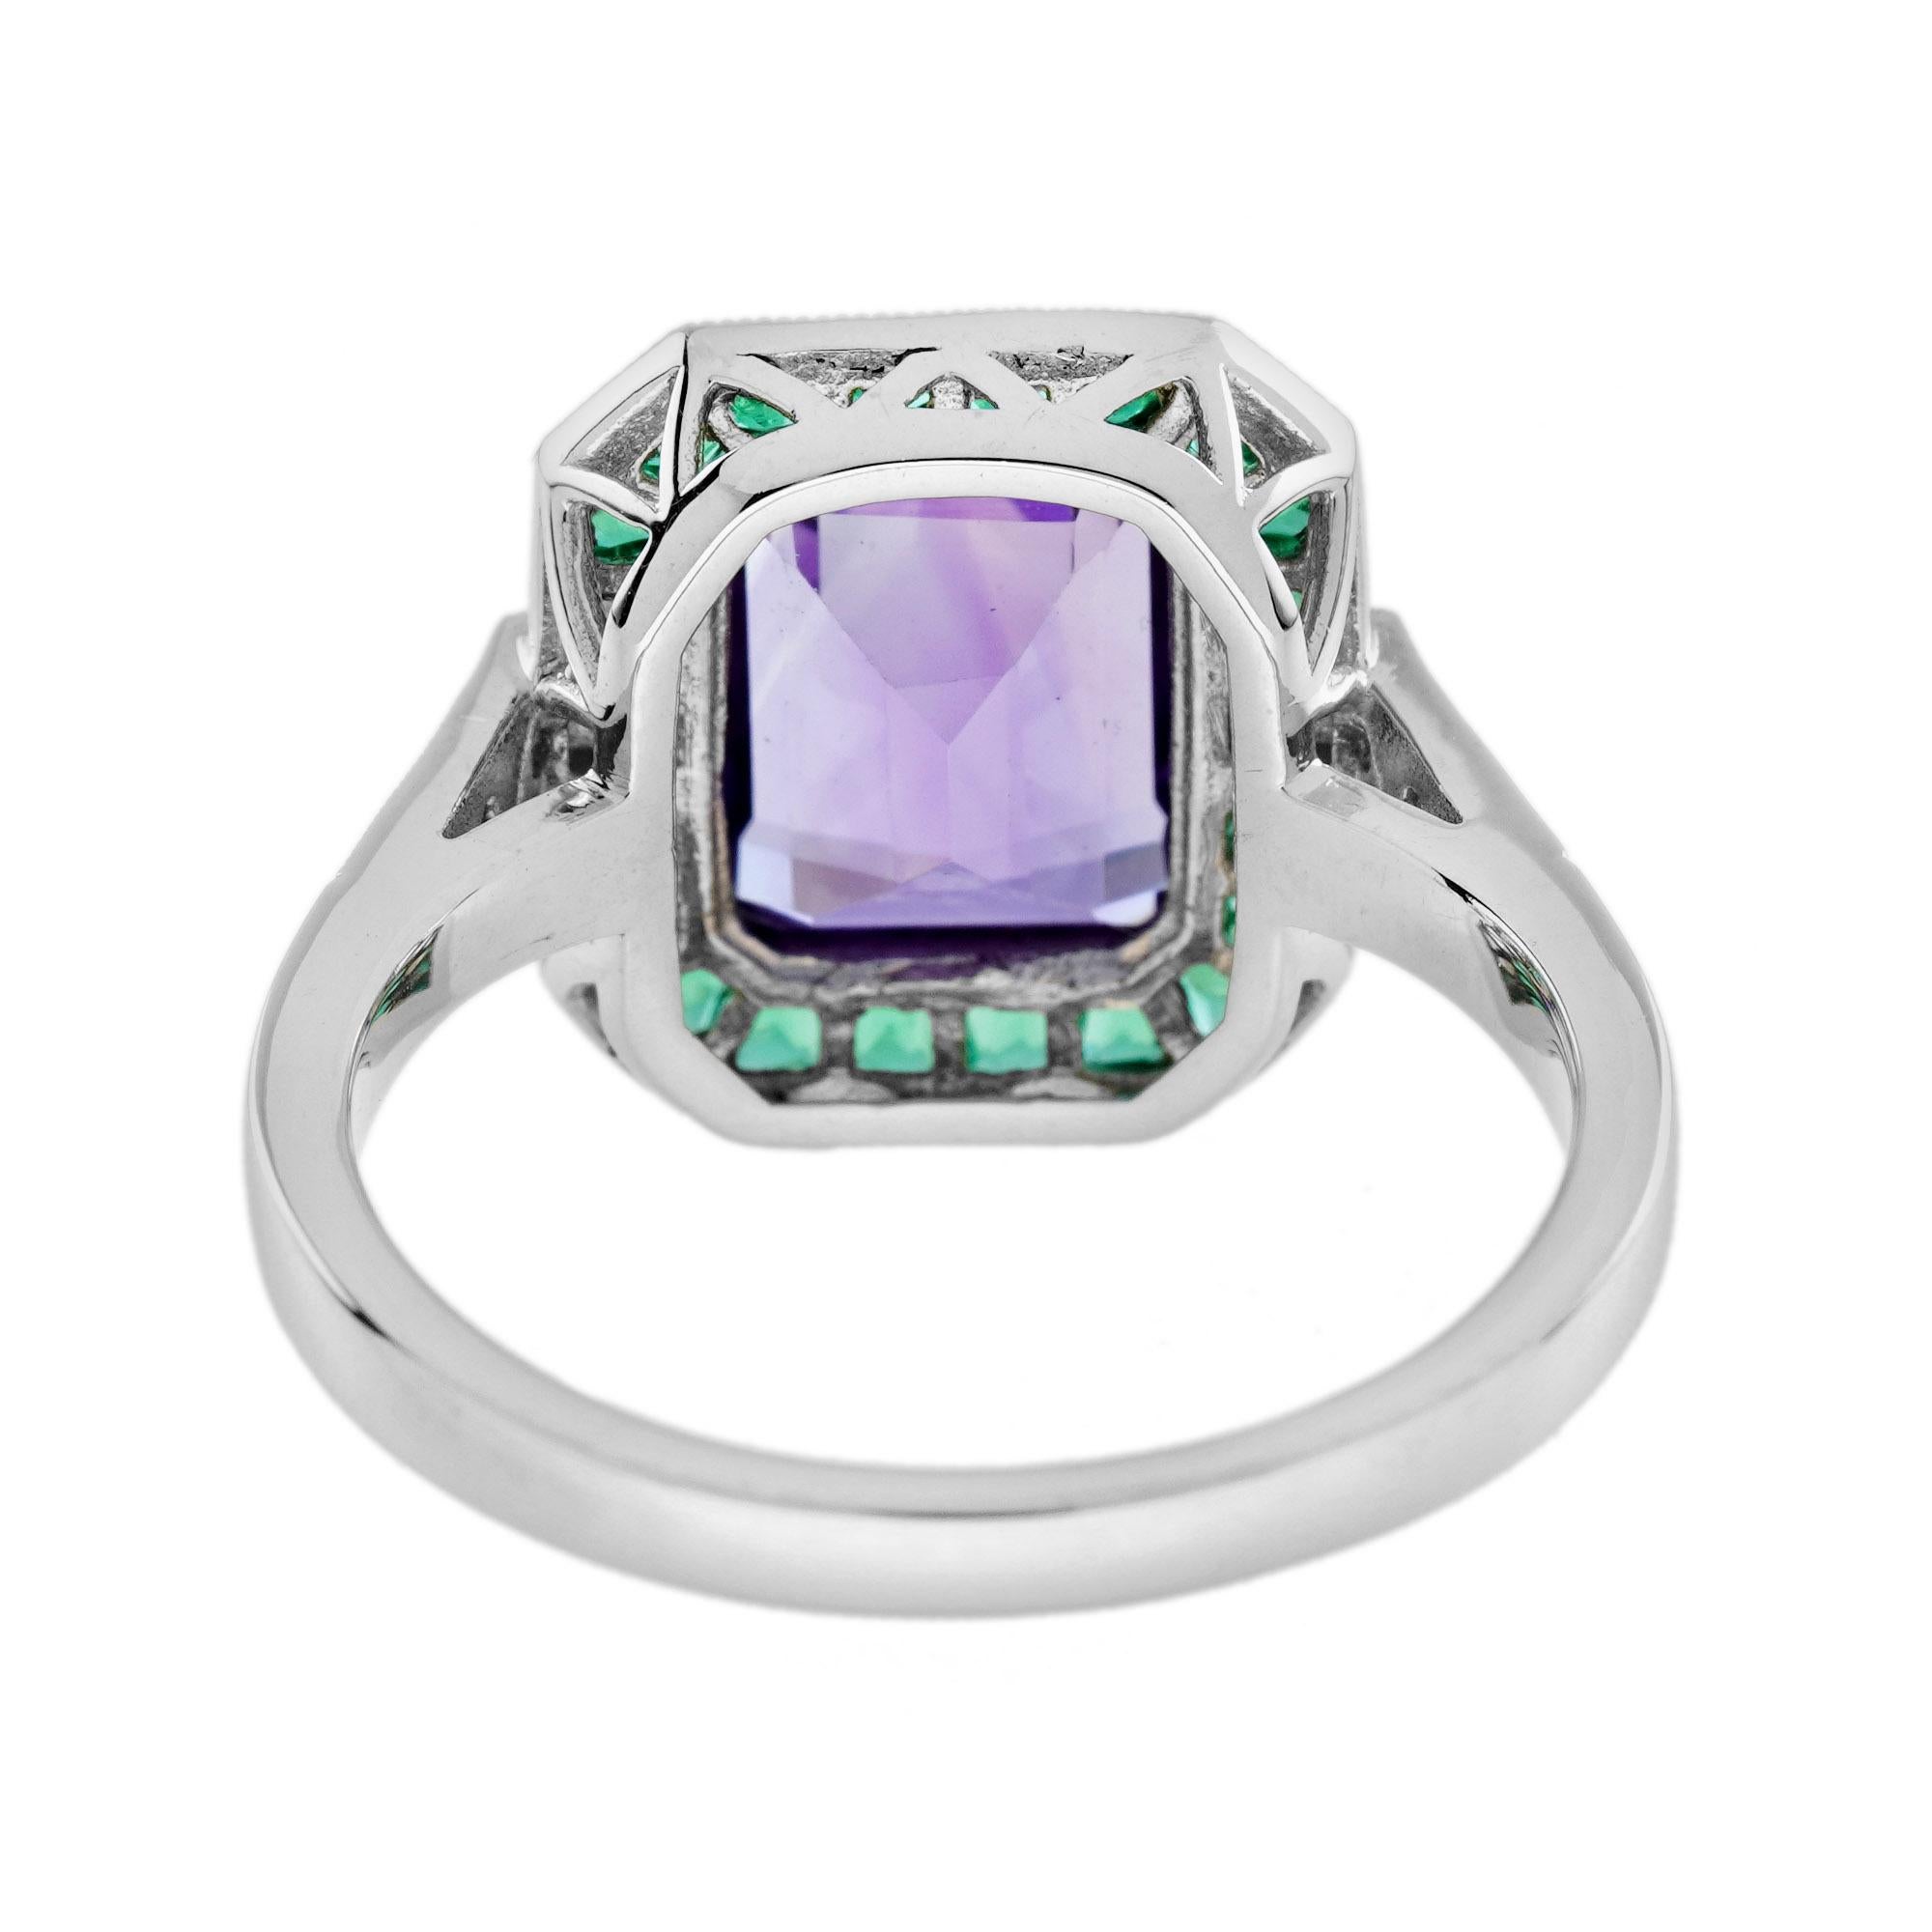 For Sale:  Emerald Cut Amethyst Emerald and Diamond Art Deco Style Ring in 14K White Gold 5